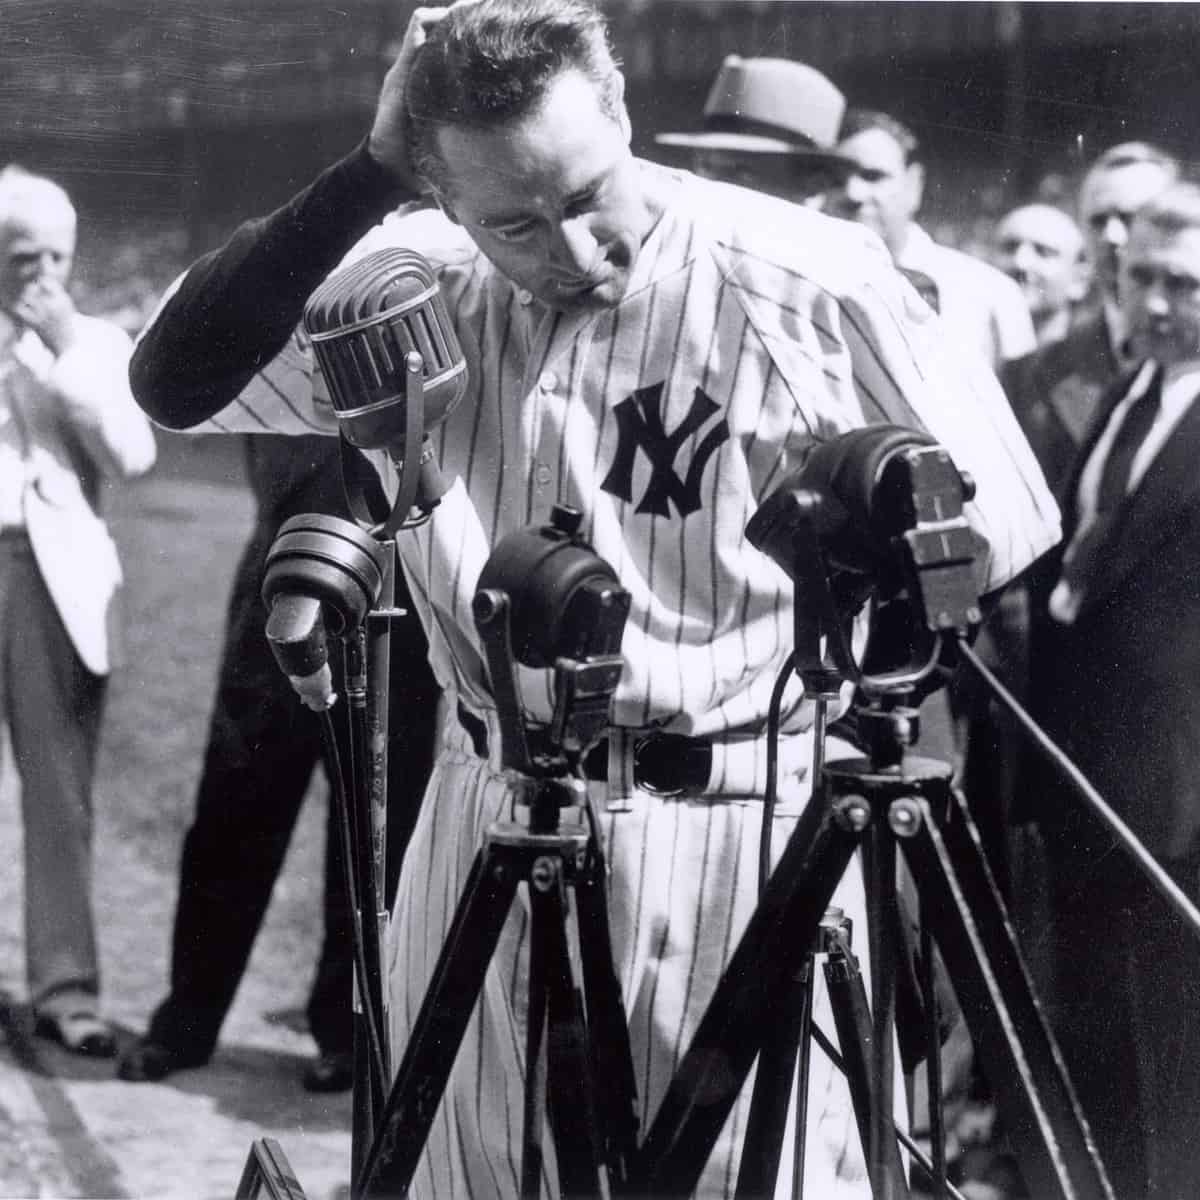 July 4, we remember Gehrig's speech, but we must not forget ALS